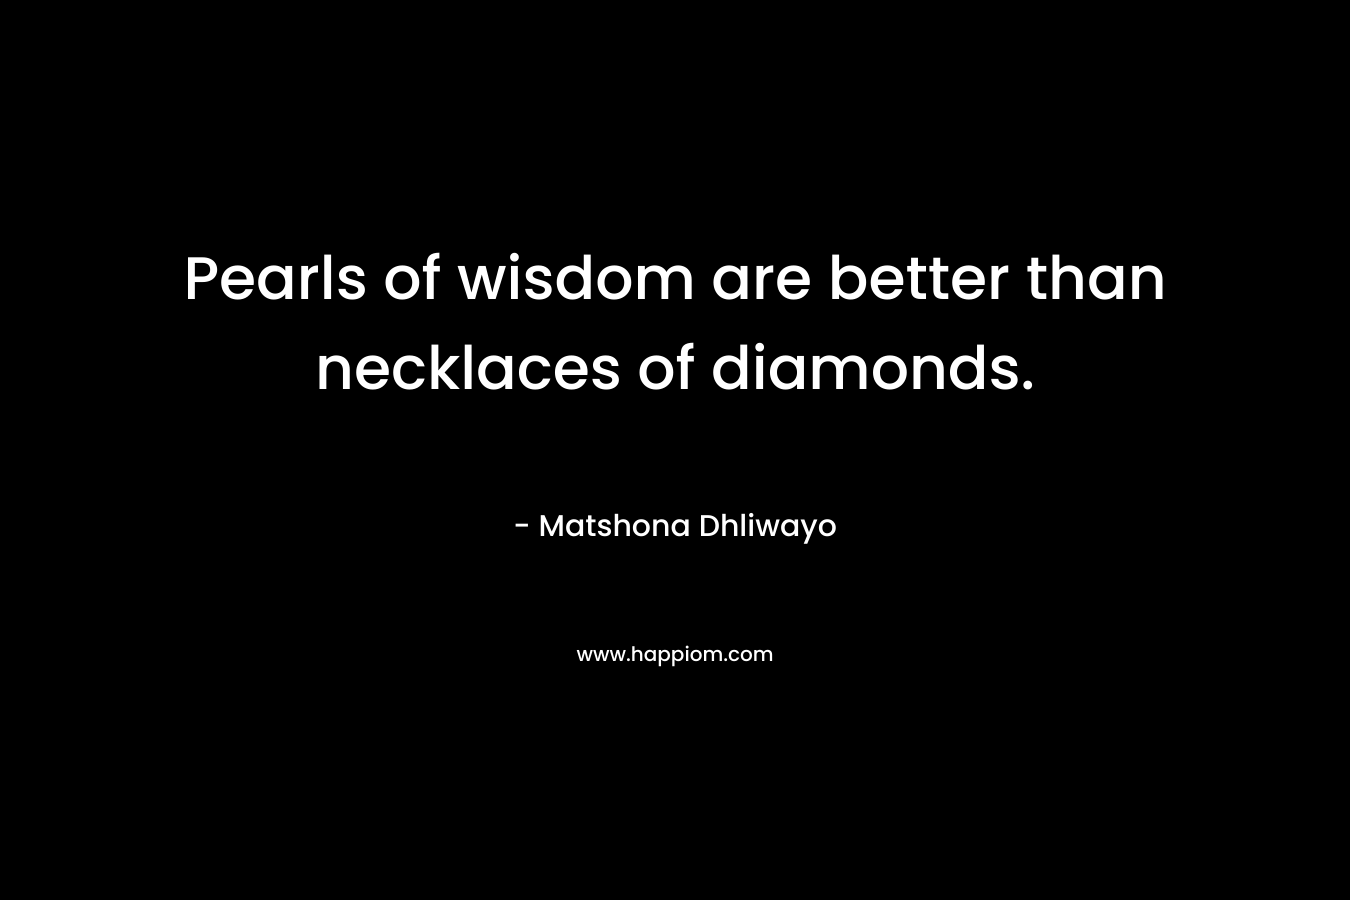 Pearls of wisdom are better than necklaces of diamonds. – Matshona Dhliwayo